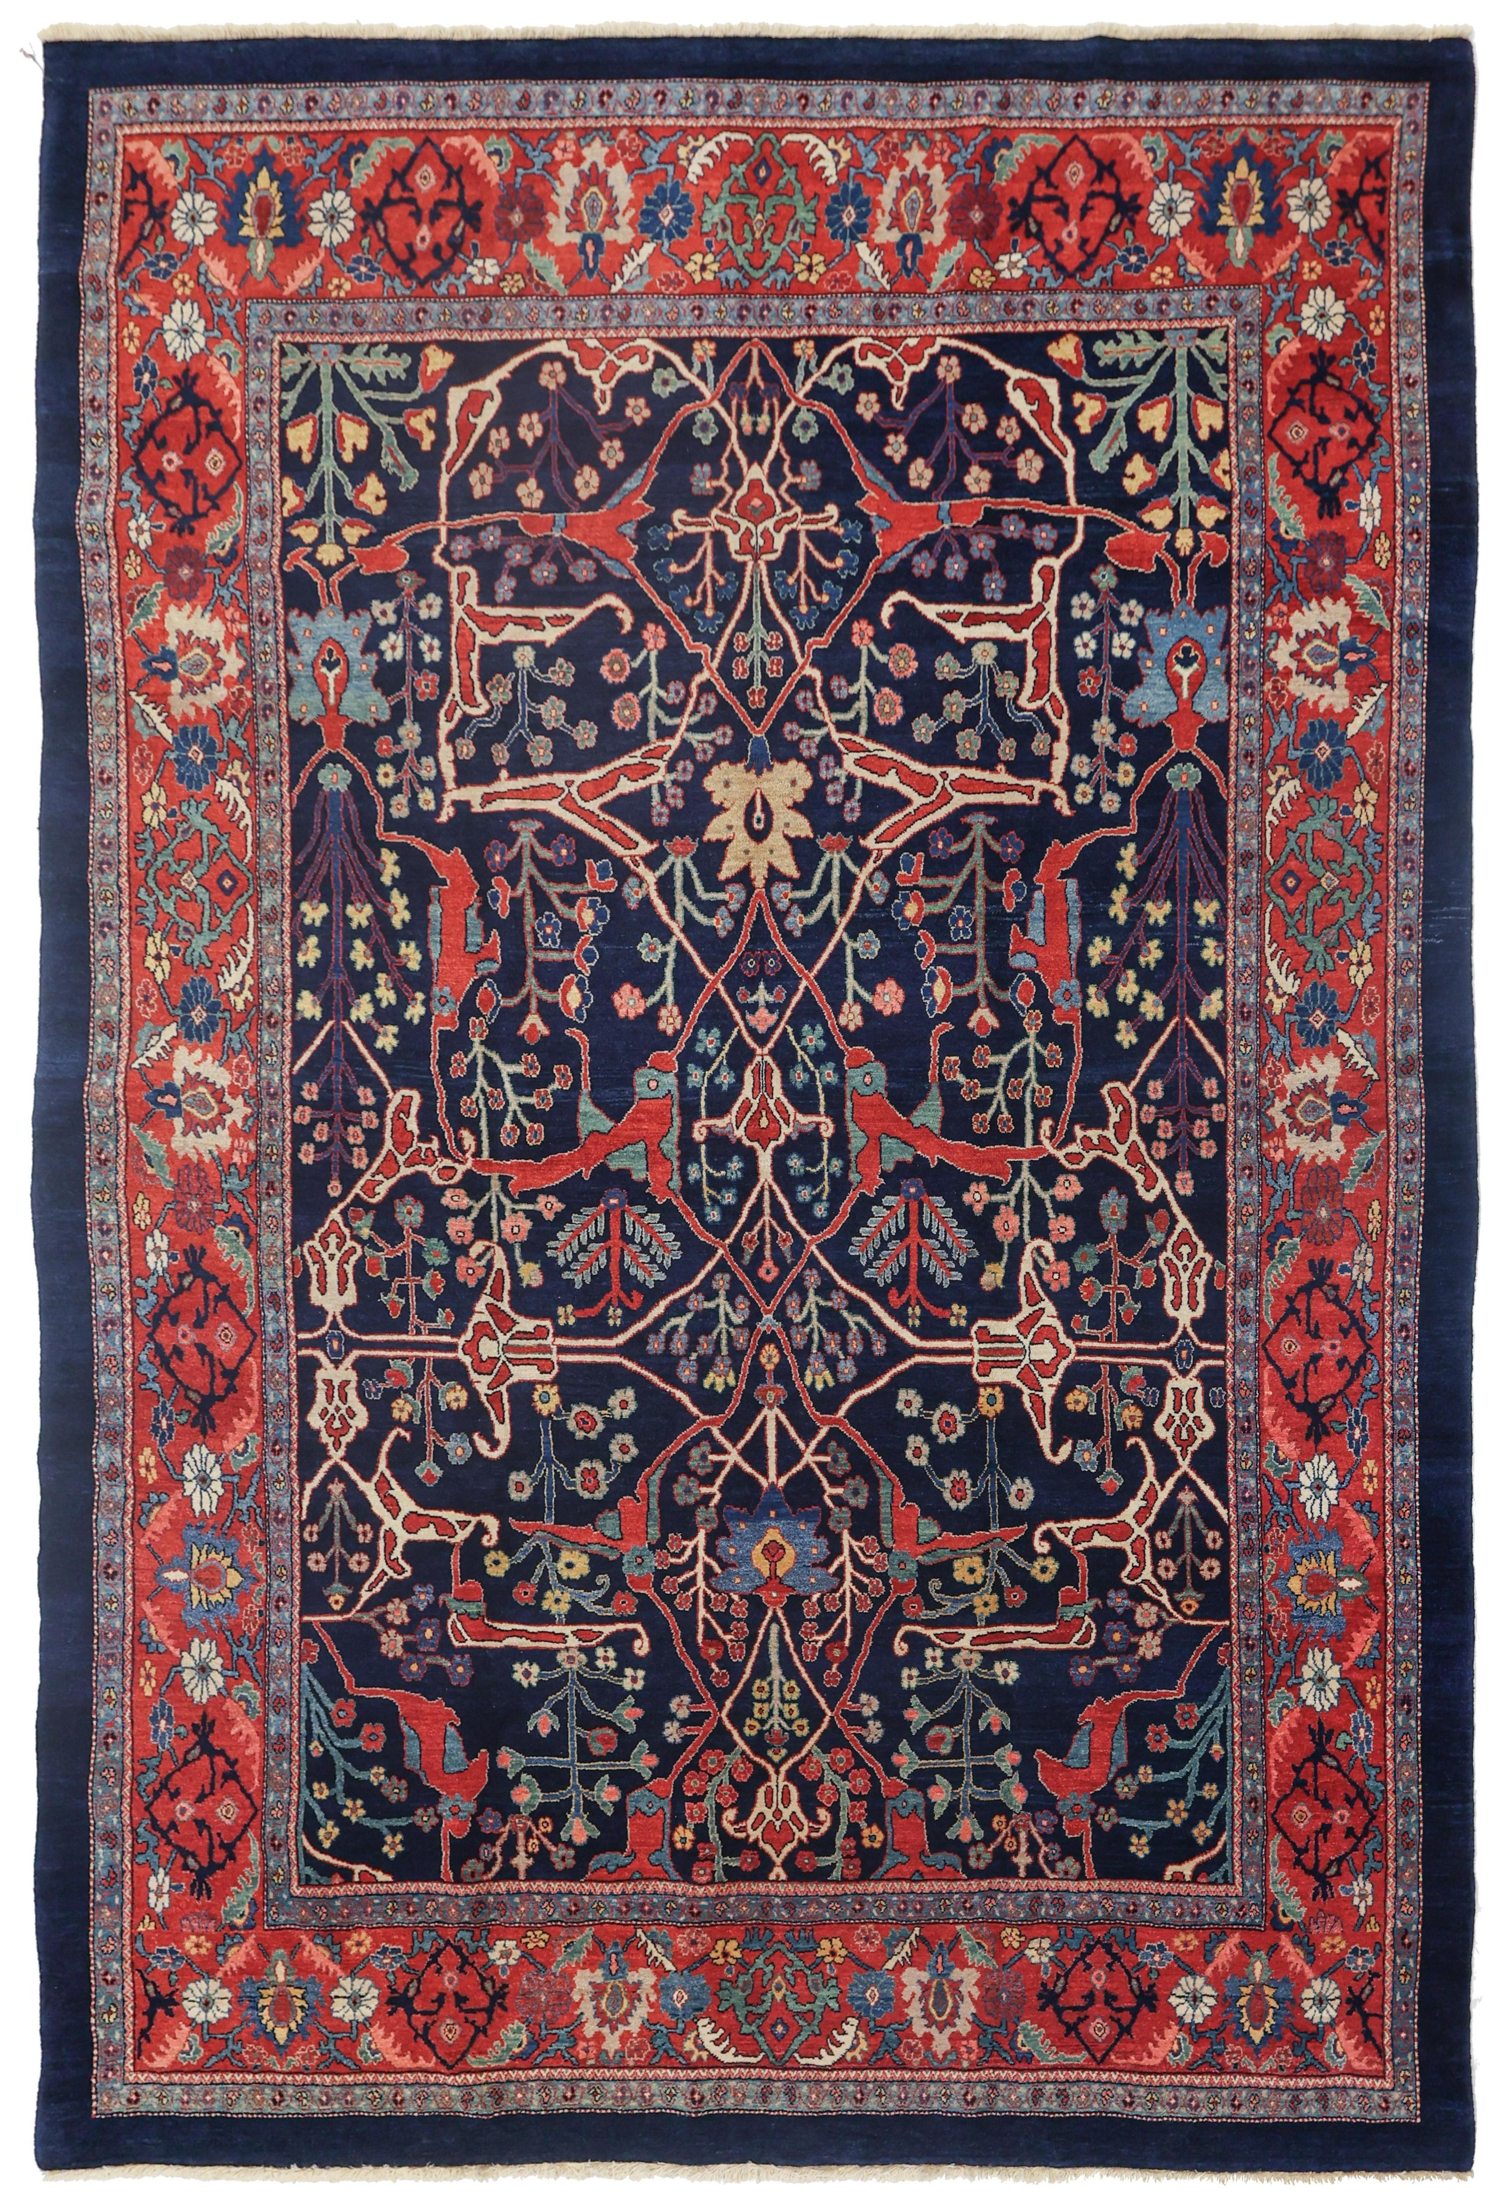 Boston area based Douglas Stock Gallery offers a carefully selected group of contemporary, hand woven Oriental rugs and room size Oriental carpets utilizing natural dyes and hand spun wool. This contemporary Bidjar carpet features the famous Split Arabesque design, one of the most important formats seen in 19th century antique Bidjar carpets, on a navy blue field that is framed by a red border with light blue guard borders. The green, yellow and sky blue highlights contribute to this being an exceptionally beautiful example.